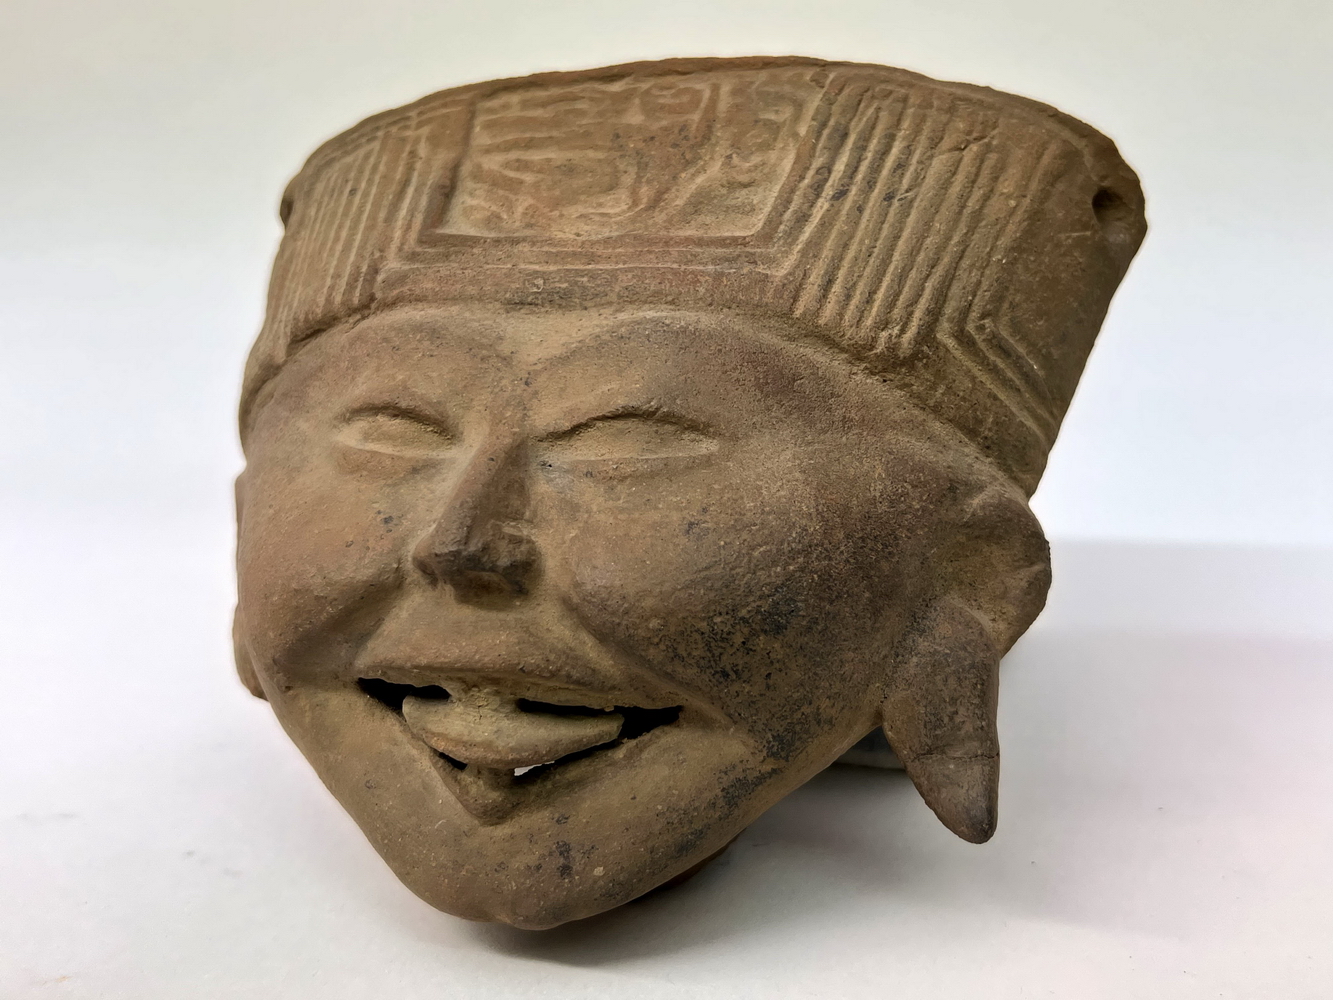 Mexico, Vera Cruz, terracotta bust of a smiling lady, 600-900